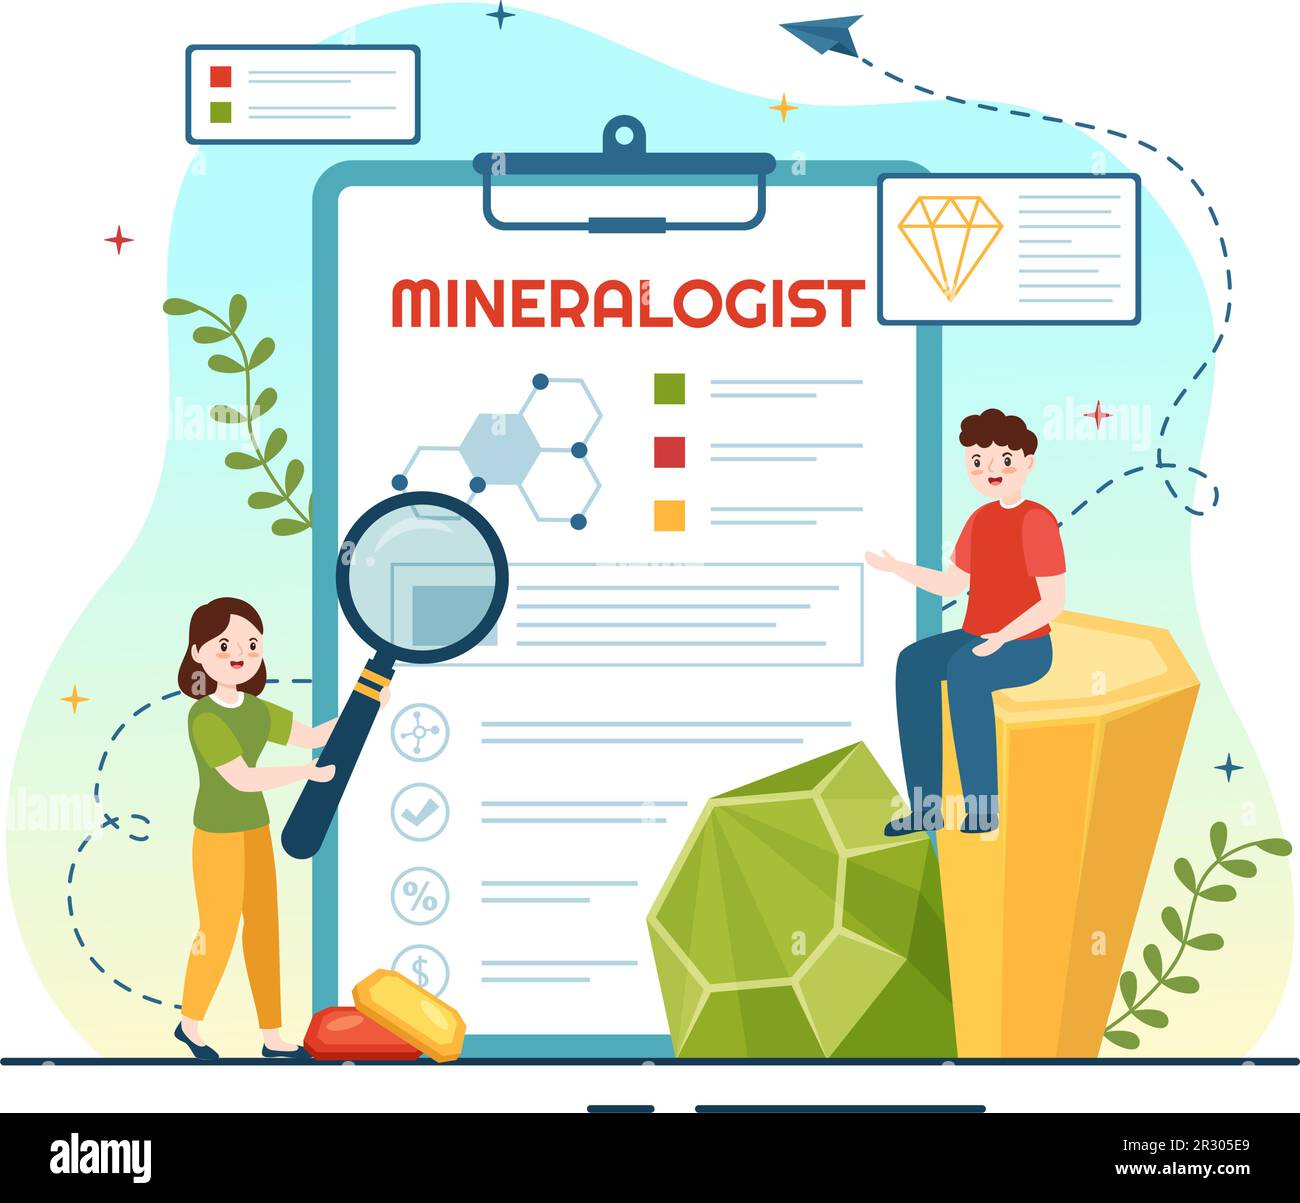 Mineralogist Vector Illustration with Natural Stone and Mineral Structure for Jewelry or Chemical Reaction in Flat Cartoon Hand Drawn Templates Stock Vector